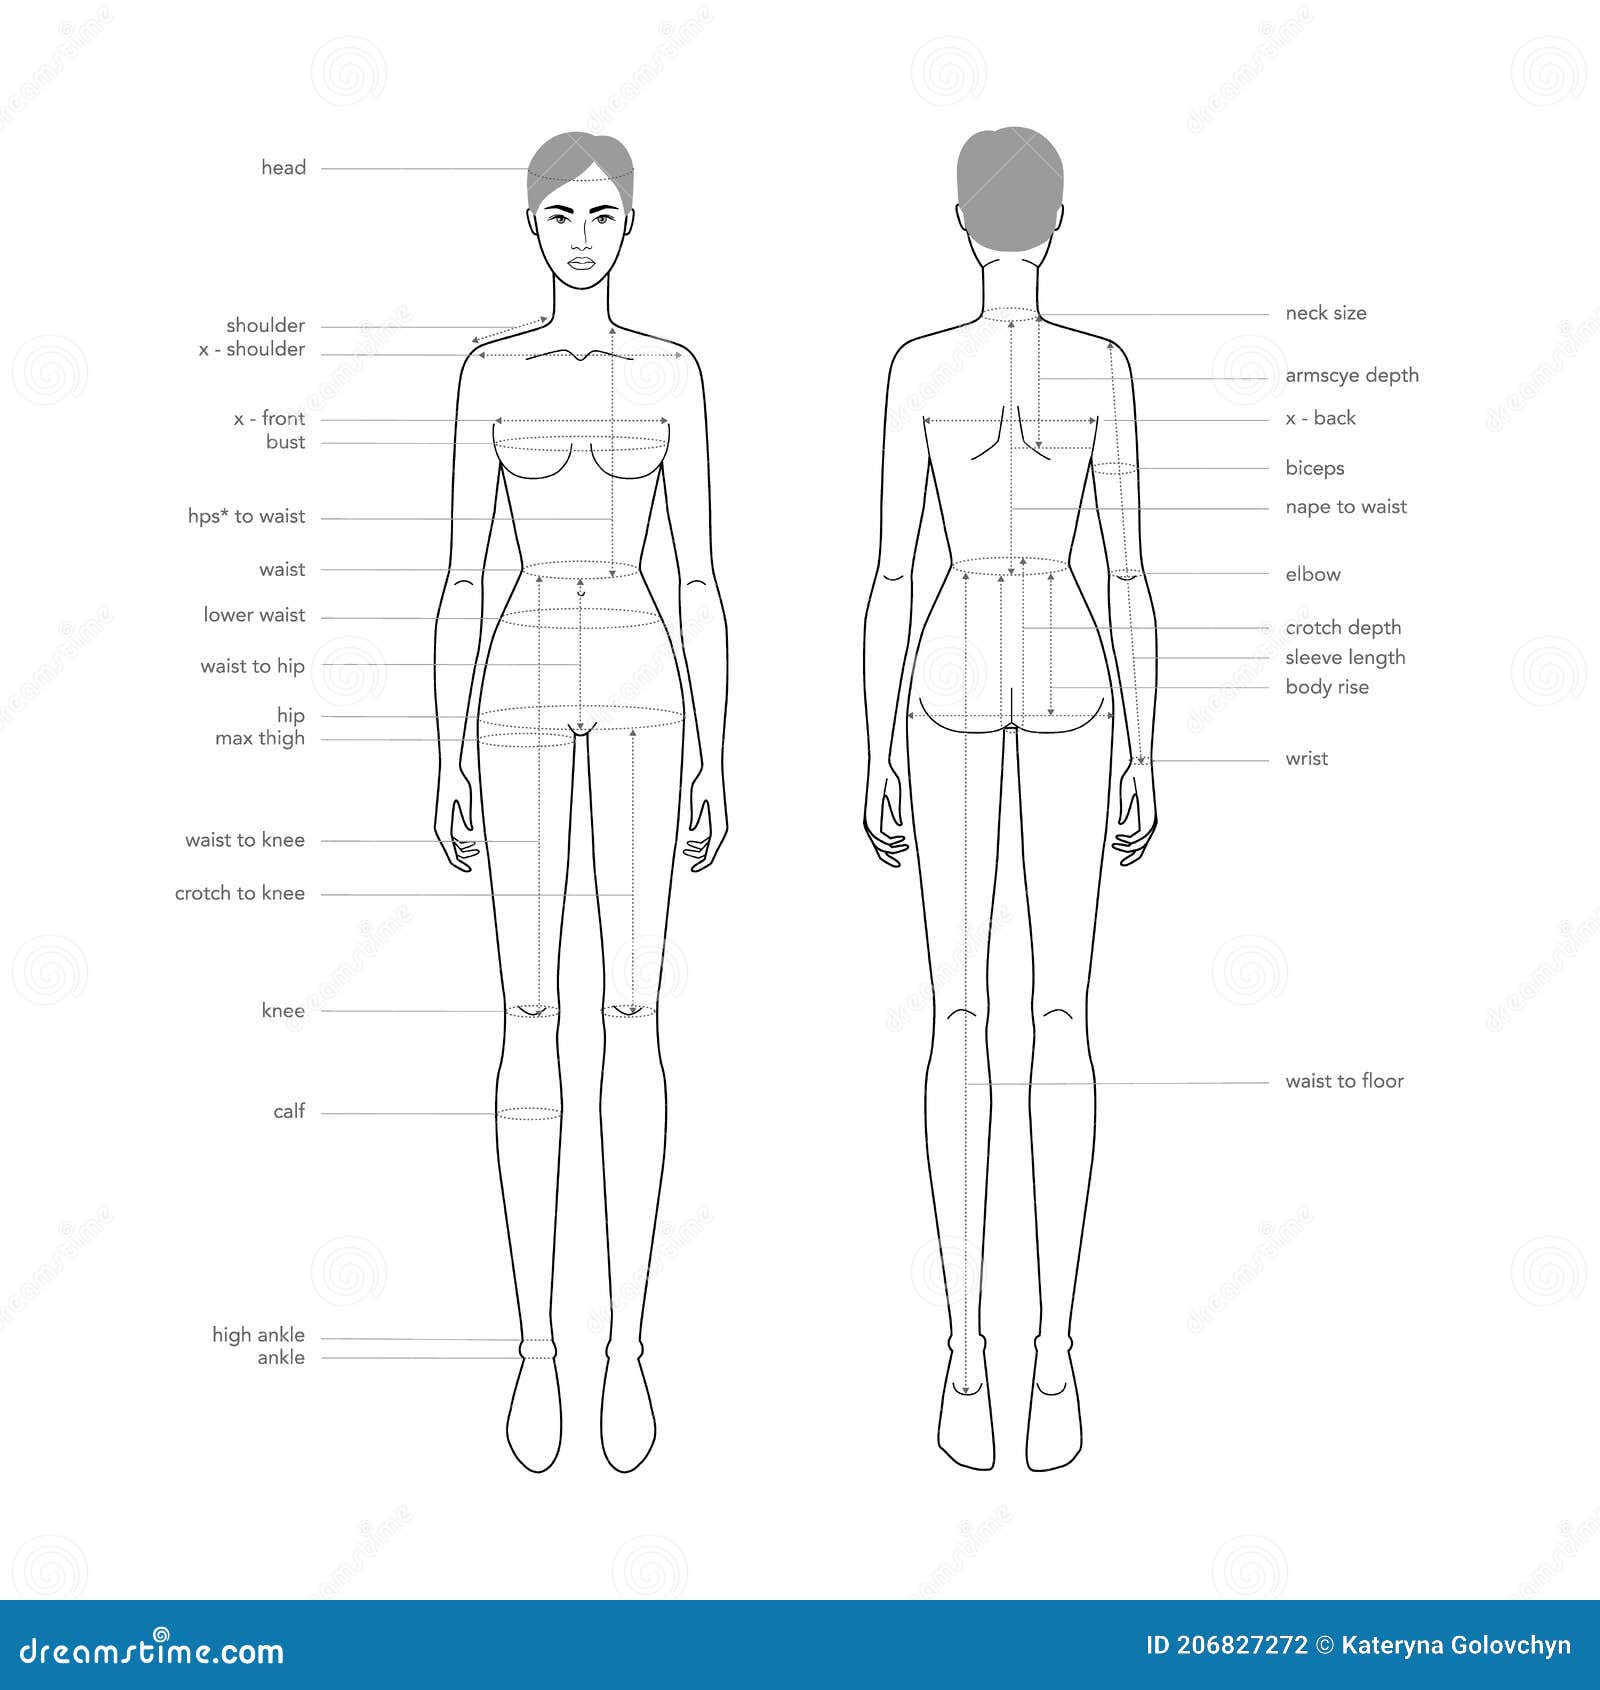 women body parts terminology measurements  for clothes and accessories production fashion lady size chart